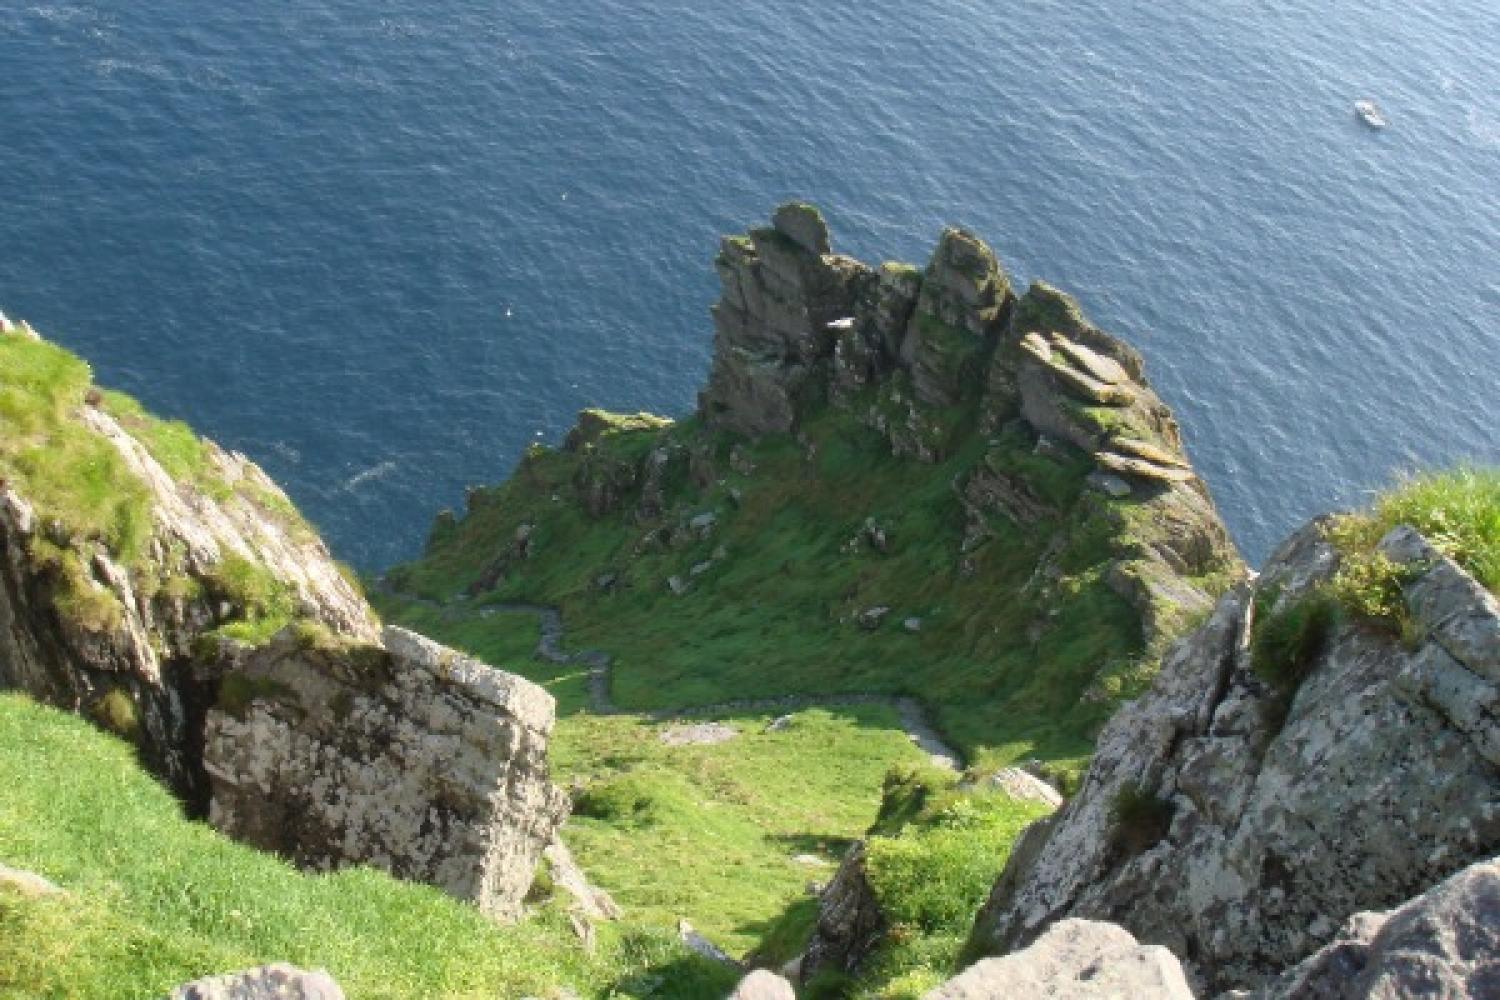 The southern stairs to the monastic community on Skellig Michael